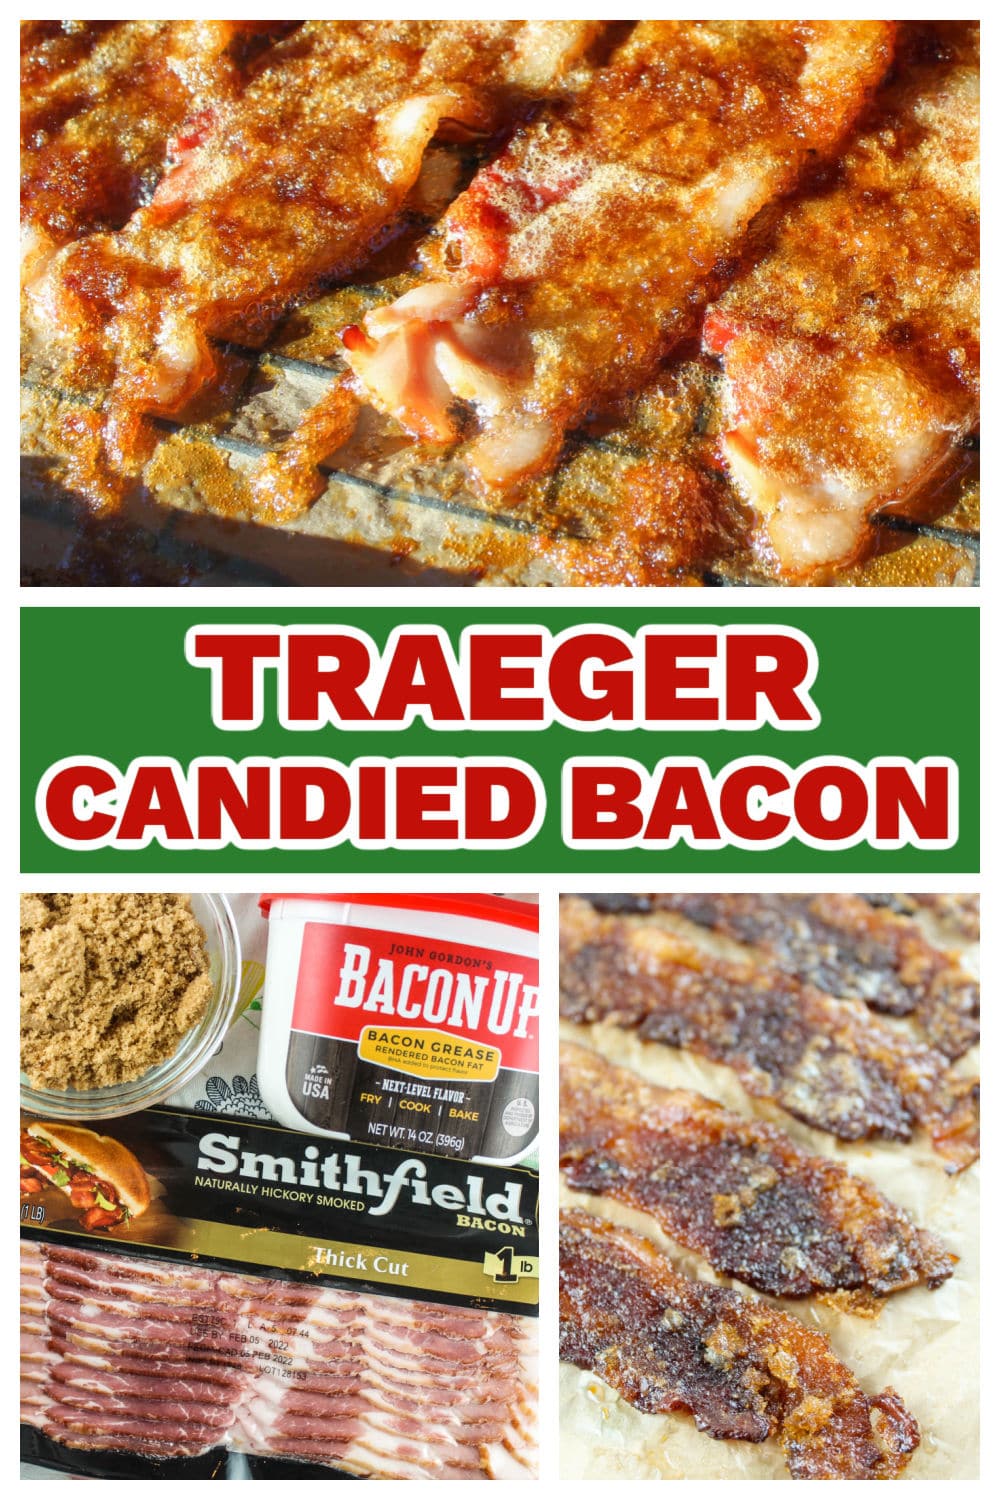 There are very few things I love more than bacon - but let me tell you - this Smoked Bacon Candy might just top the list!!! I've had and made candied bacon - but putting it on the Traeger (or whatever pellet grill you have) and adding that smoky deliciousness - WOW JUST WOW! It adds a whole new dimension of flavor!!!! via @foodhussy